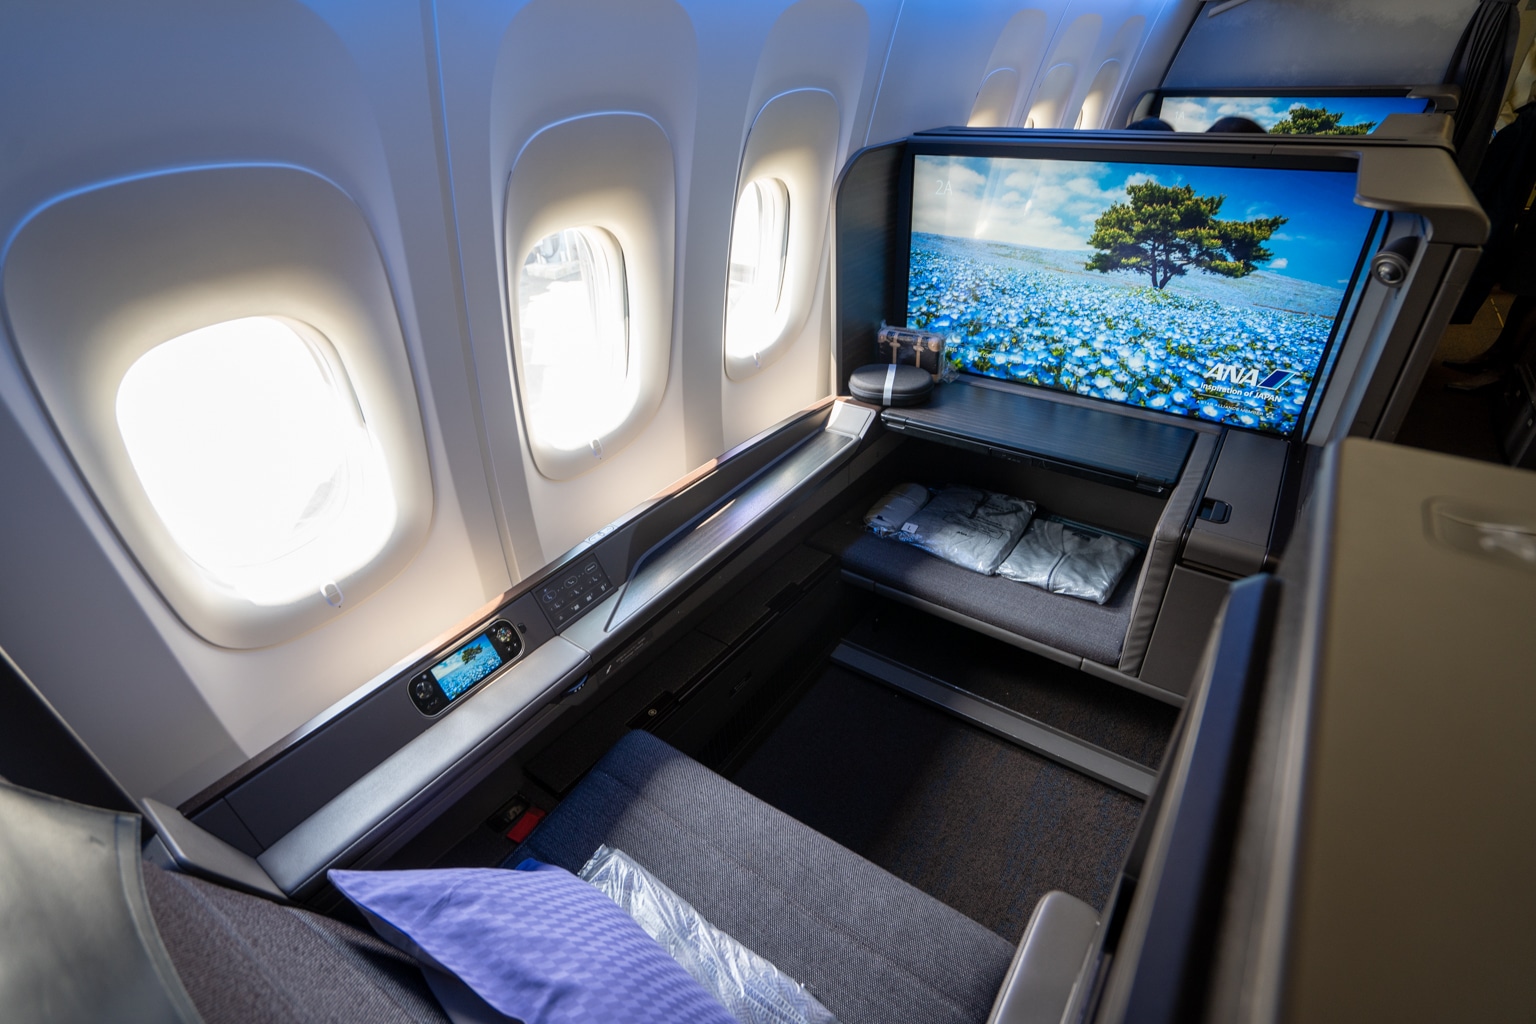 The Complete Guide to ANA First Class | Prince of Travel